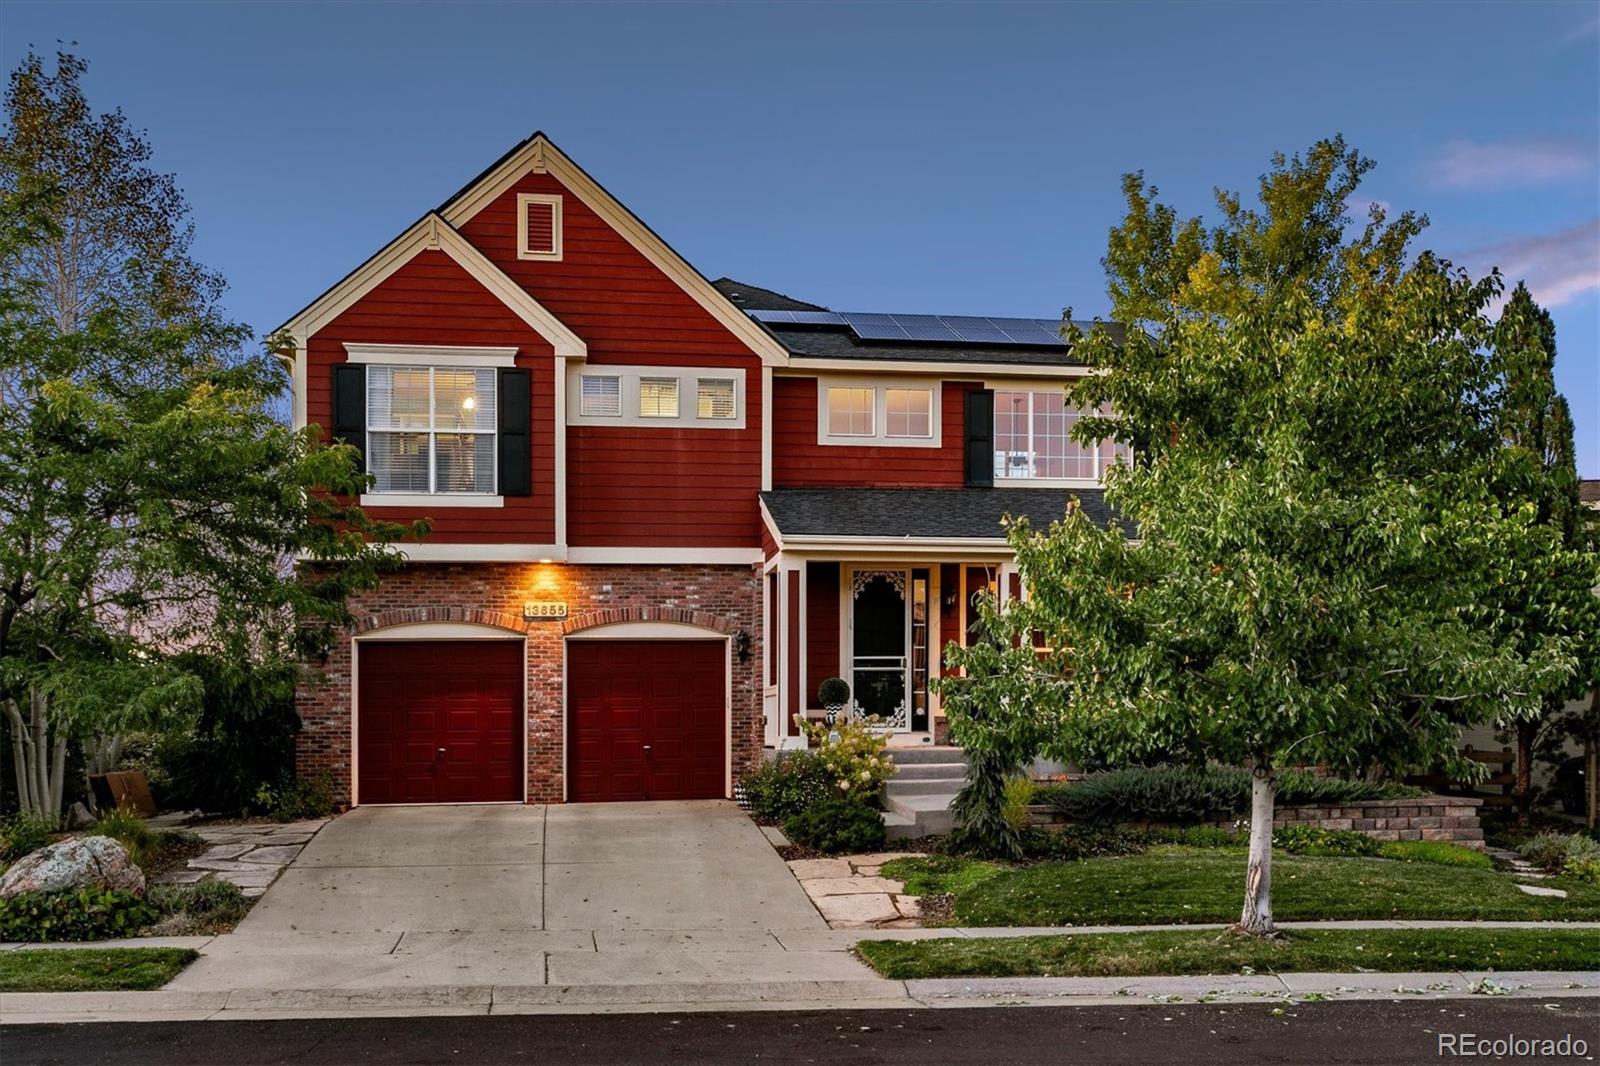 13655 W 86th Drive, arvada MLS: 1996766 Beds: 5 Baths: 4 Price: $1,000,000